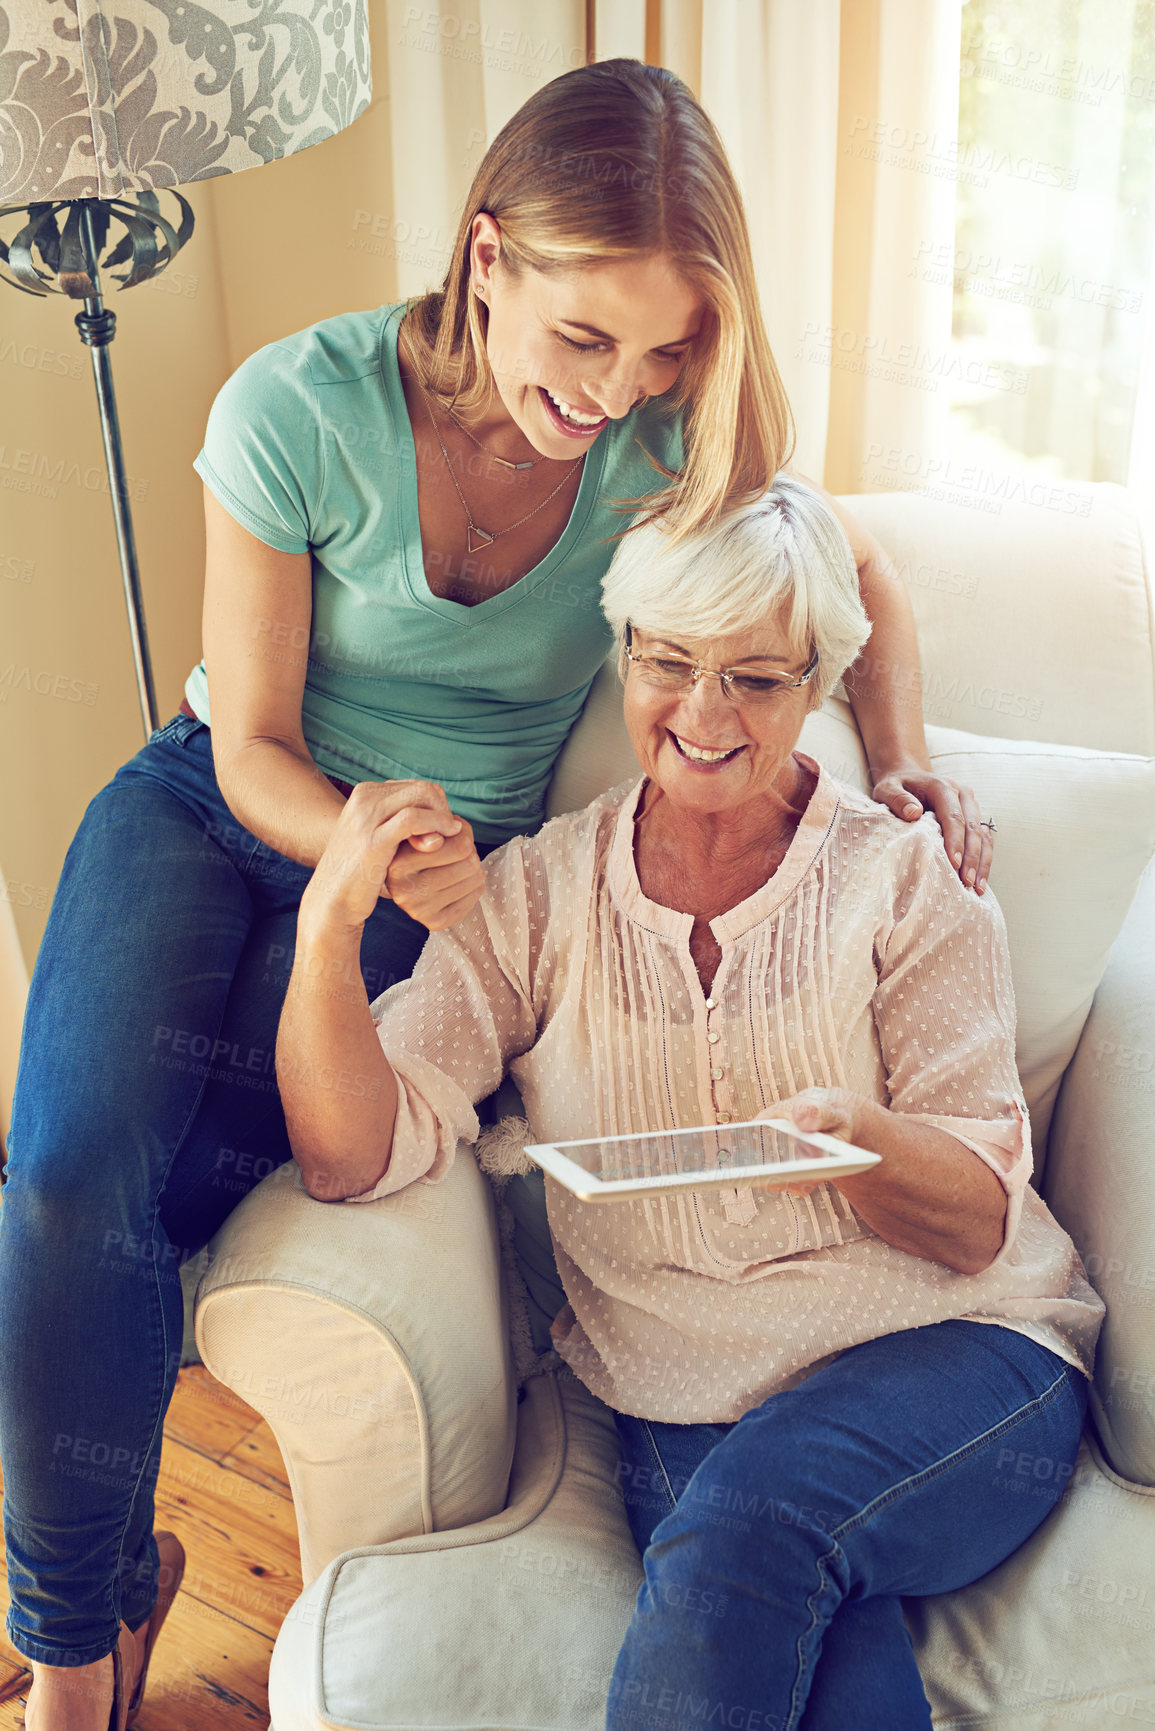 Buy stock photo Shot of a woman showing her elderly mother how to use a tablet at home